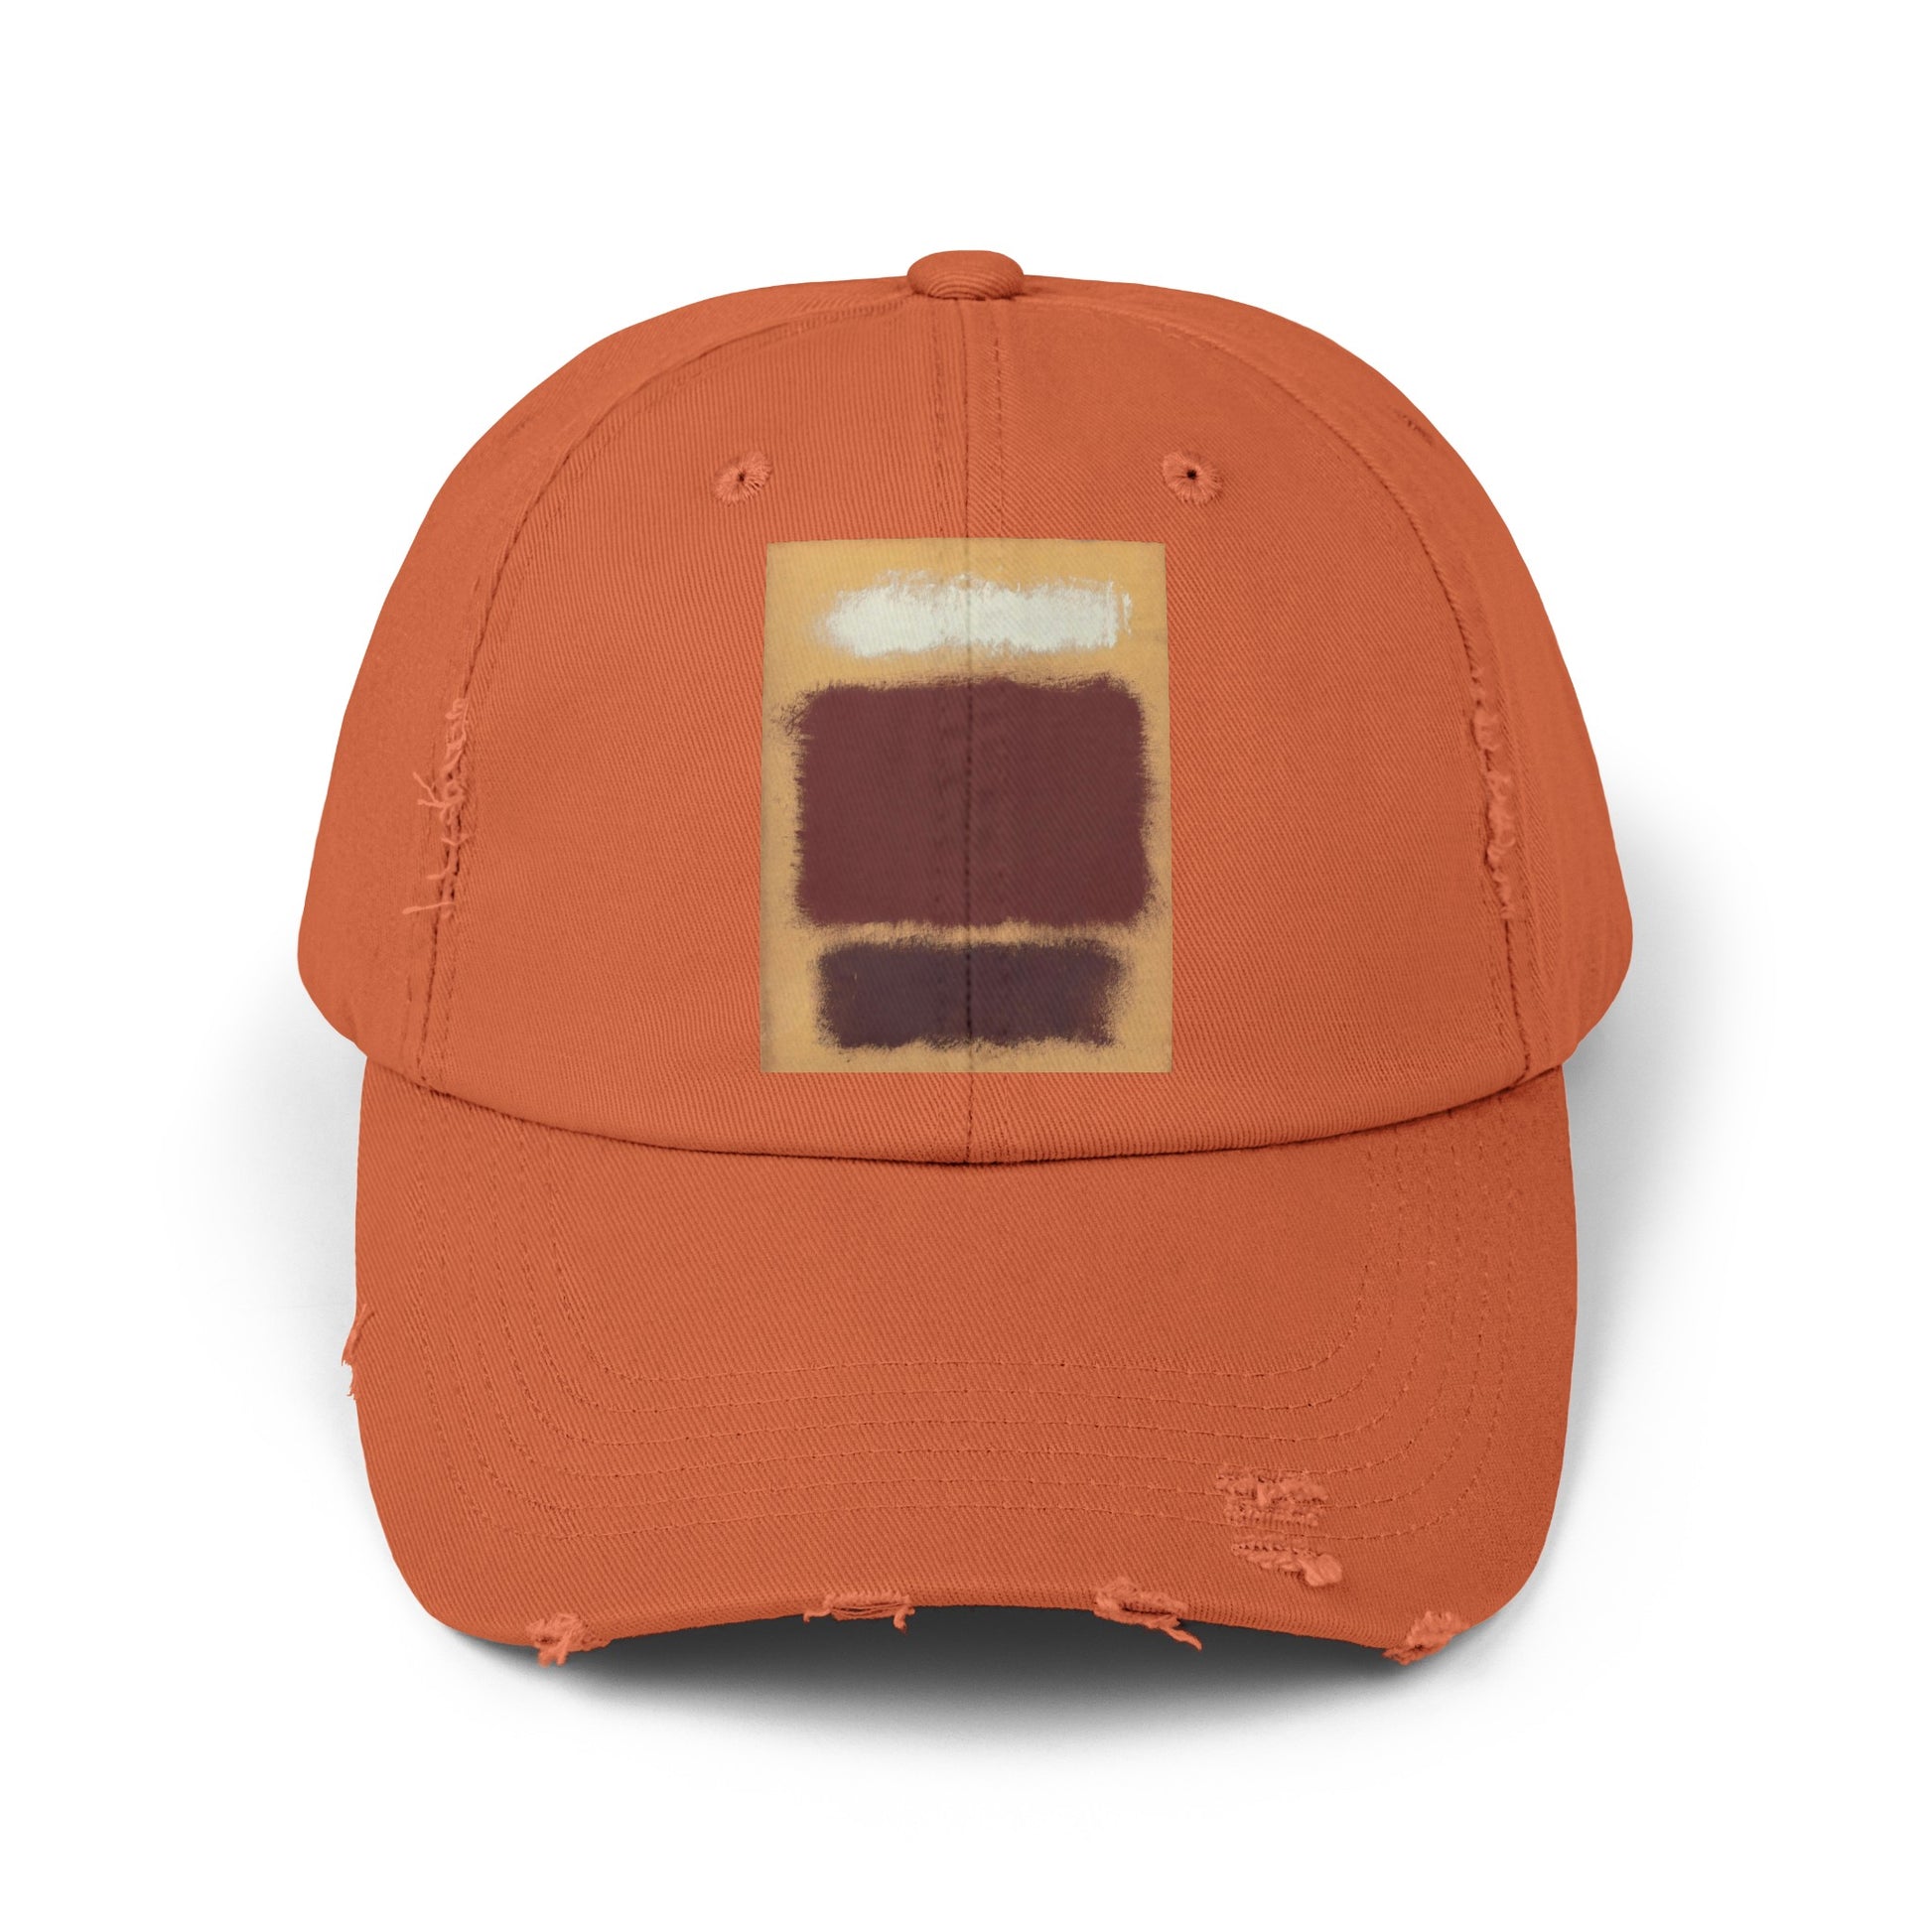 an orange hat with a brown and white square on it